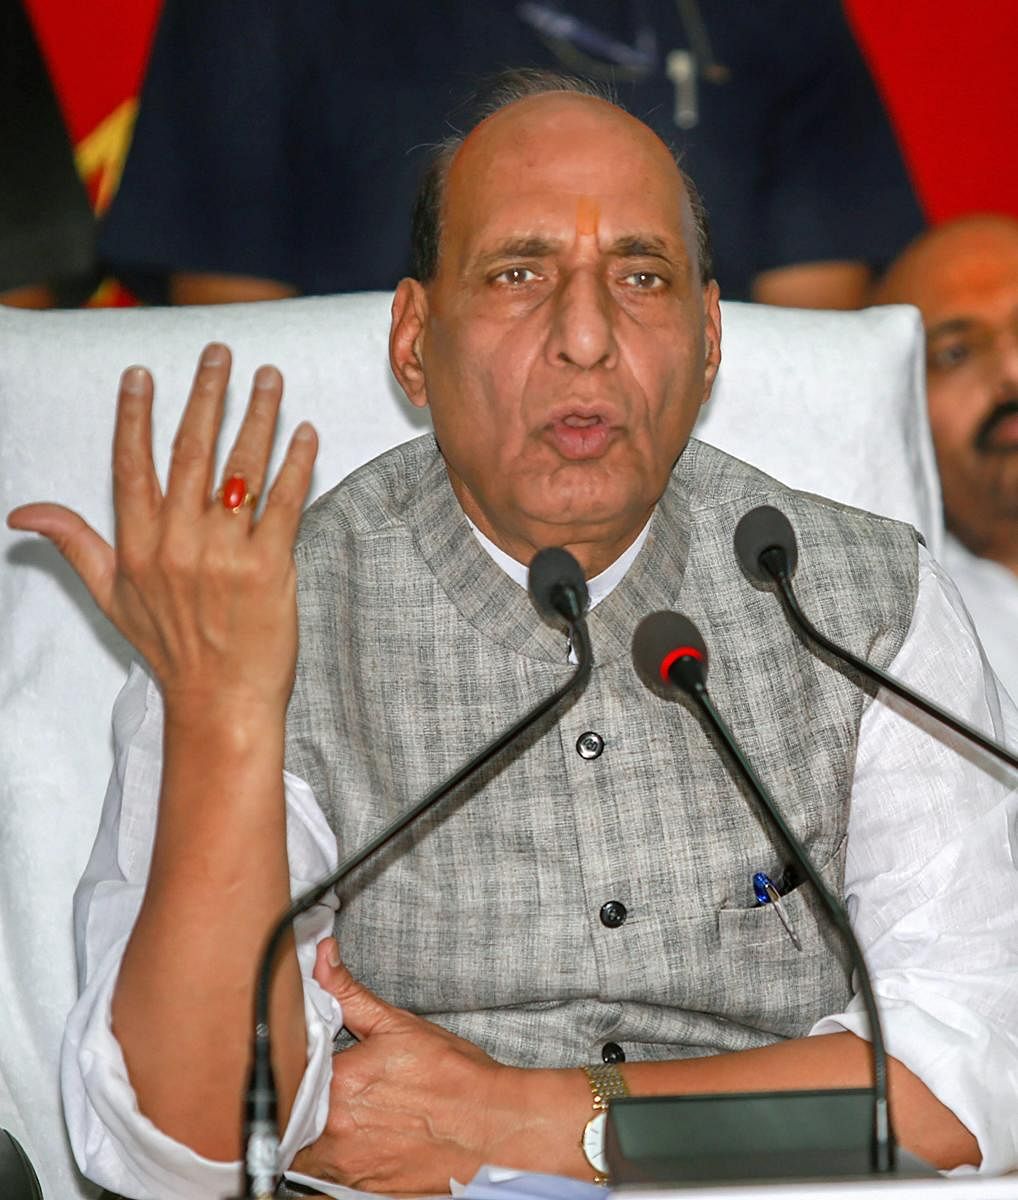 Home Minister Rajnath Singh on Monday said the government is "ready to talk to everyone" over the Kashmir issue, while asserting that terrorism in the Valley is "Pakistan-sponsored". PTI file photo